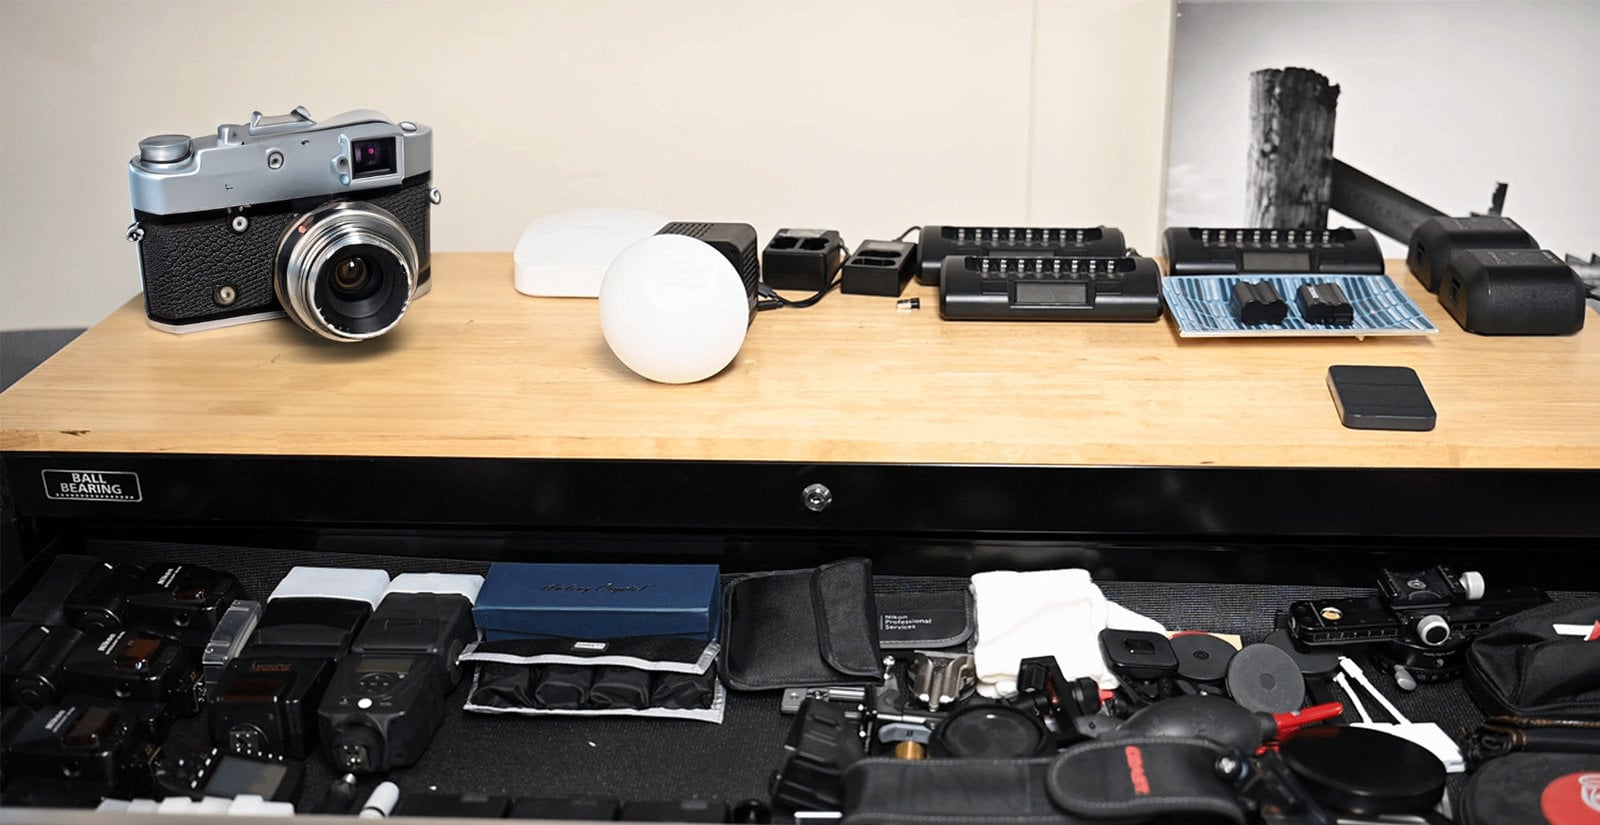 Collection of various photography equipment on desk.